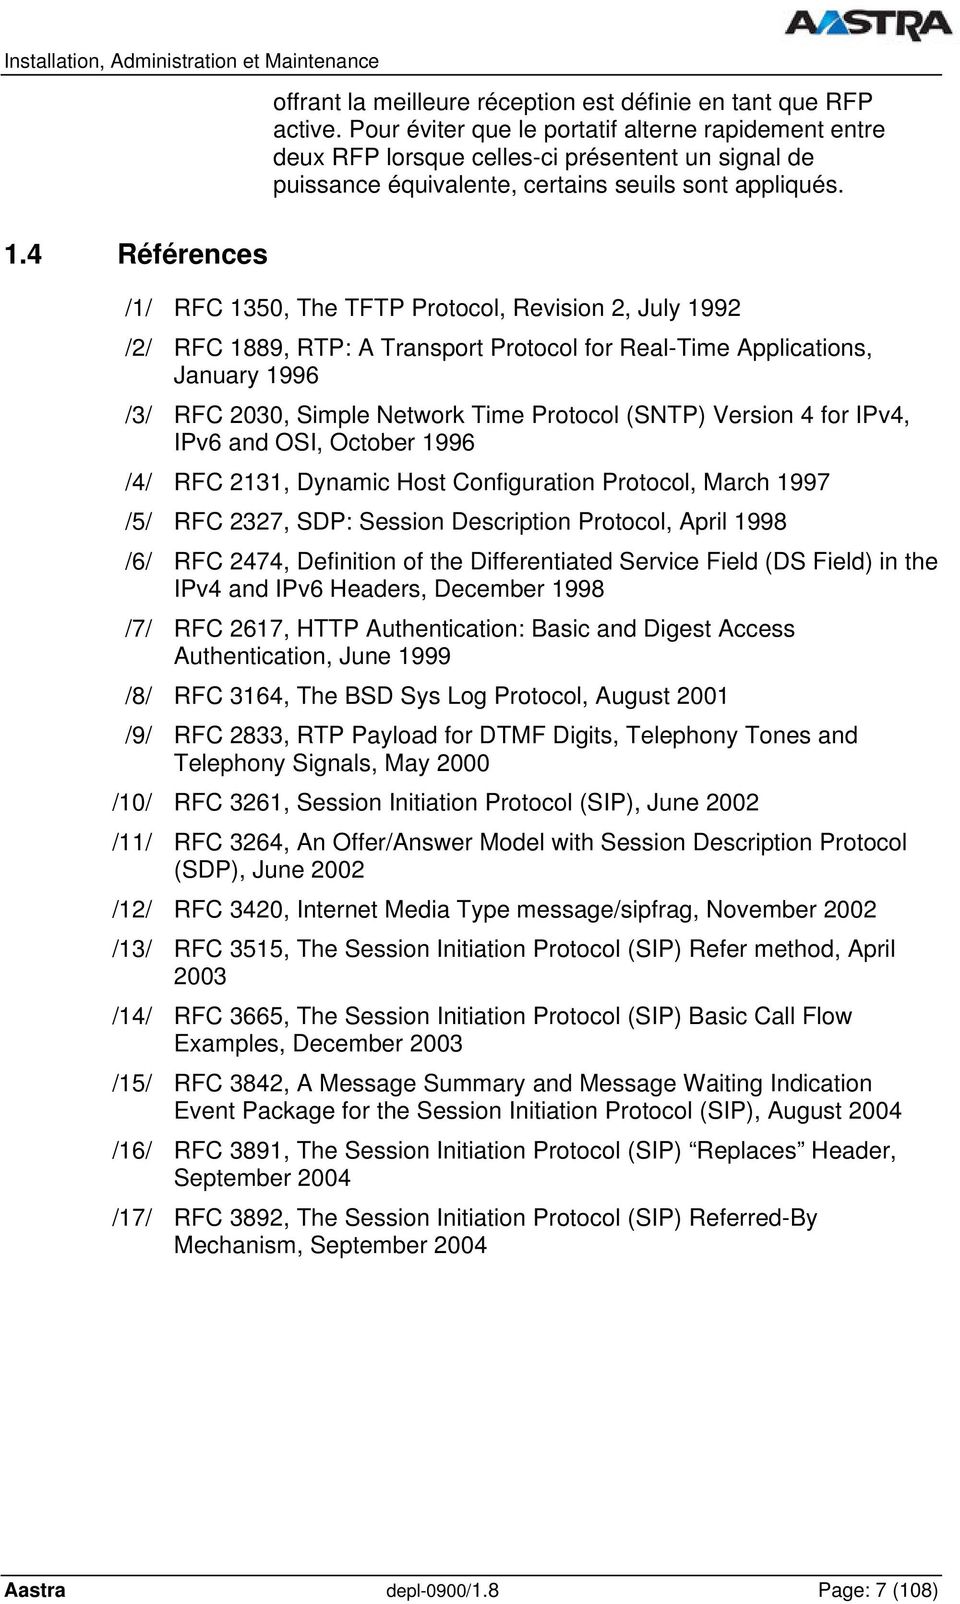 4 Références /1/ RFC 1350, The TFTP Protocol, Revision 2, July 1992 /2/ RFC 1889, RTP: A Transport Protocol for Real-Time Applications, January 1996 /3/ RFC 2030, Simple Network Time Protocol (SNTP)